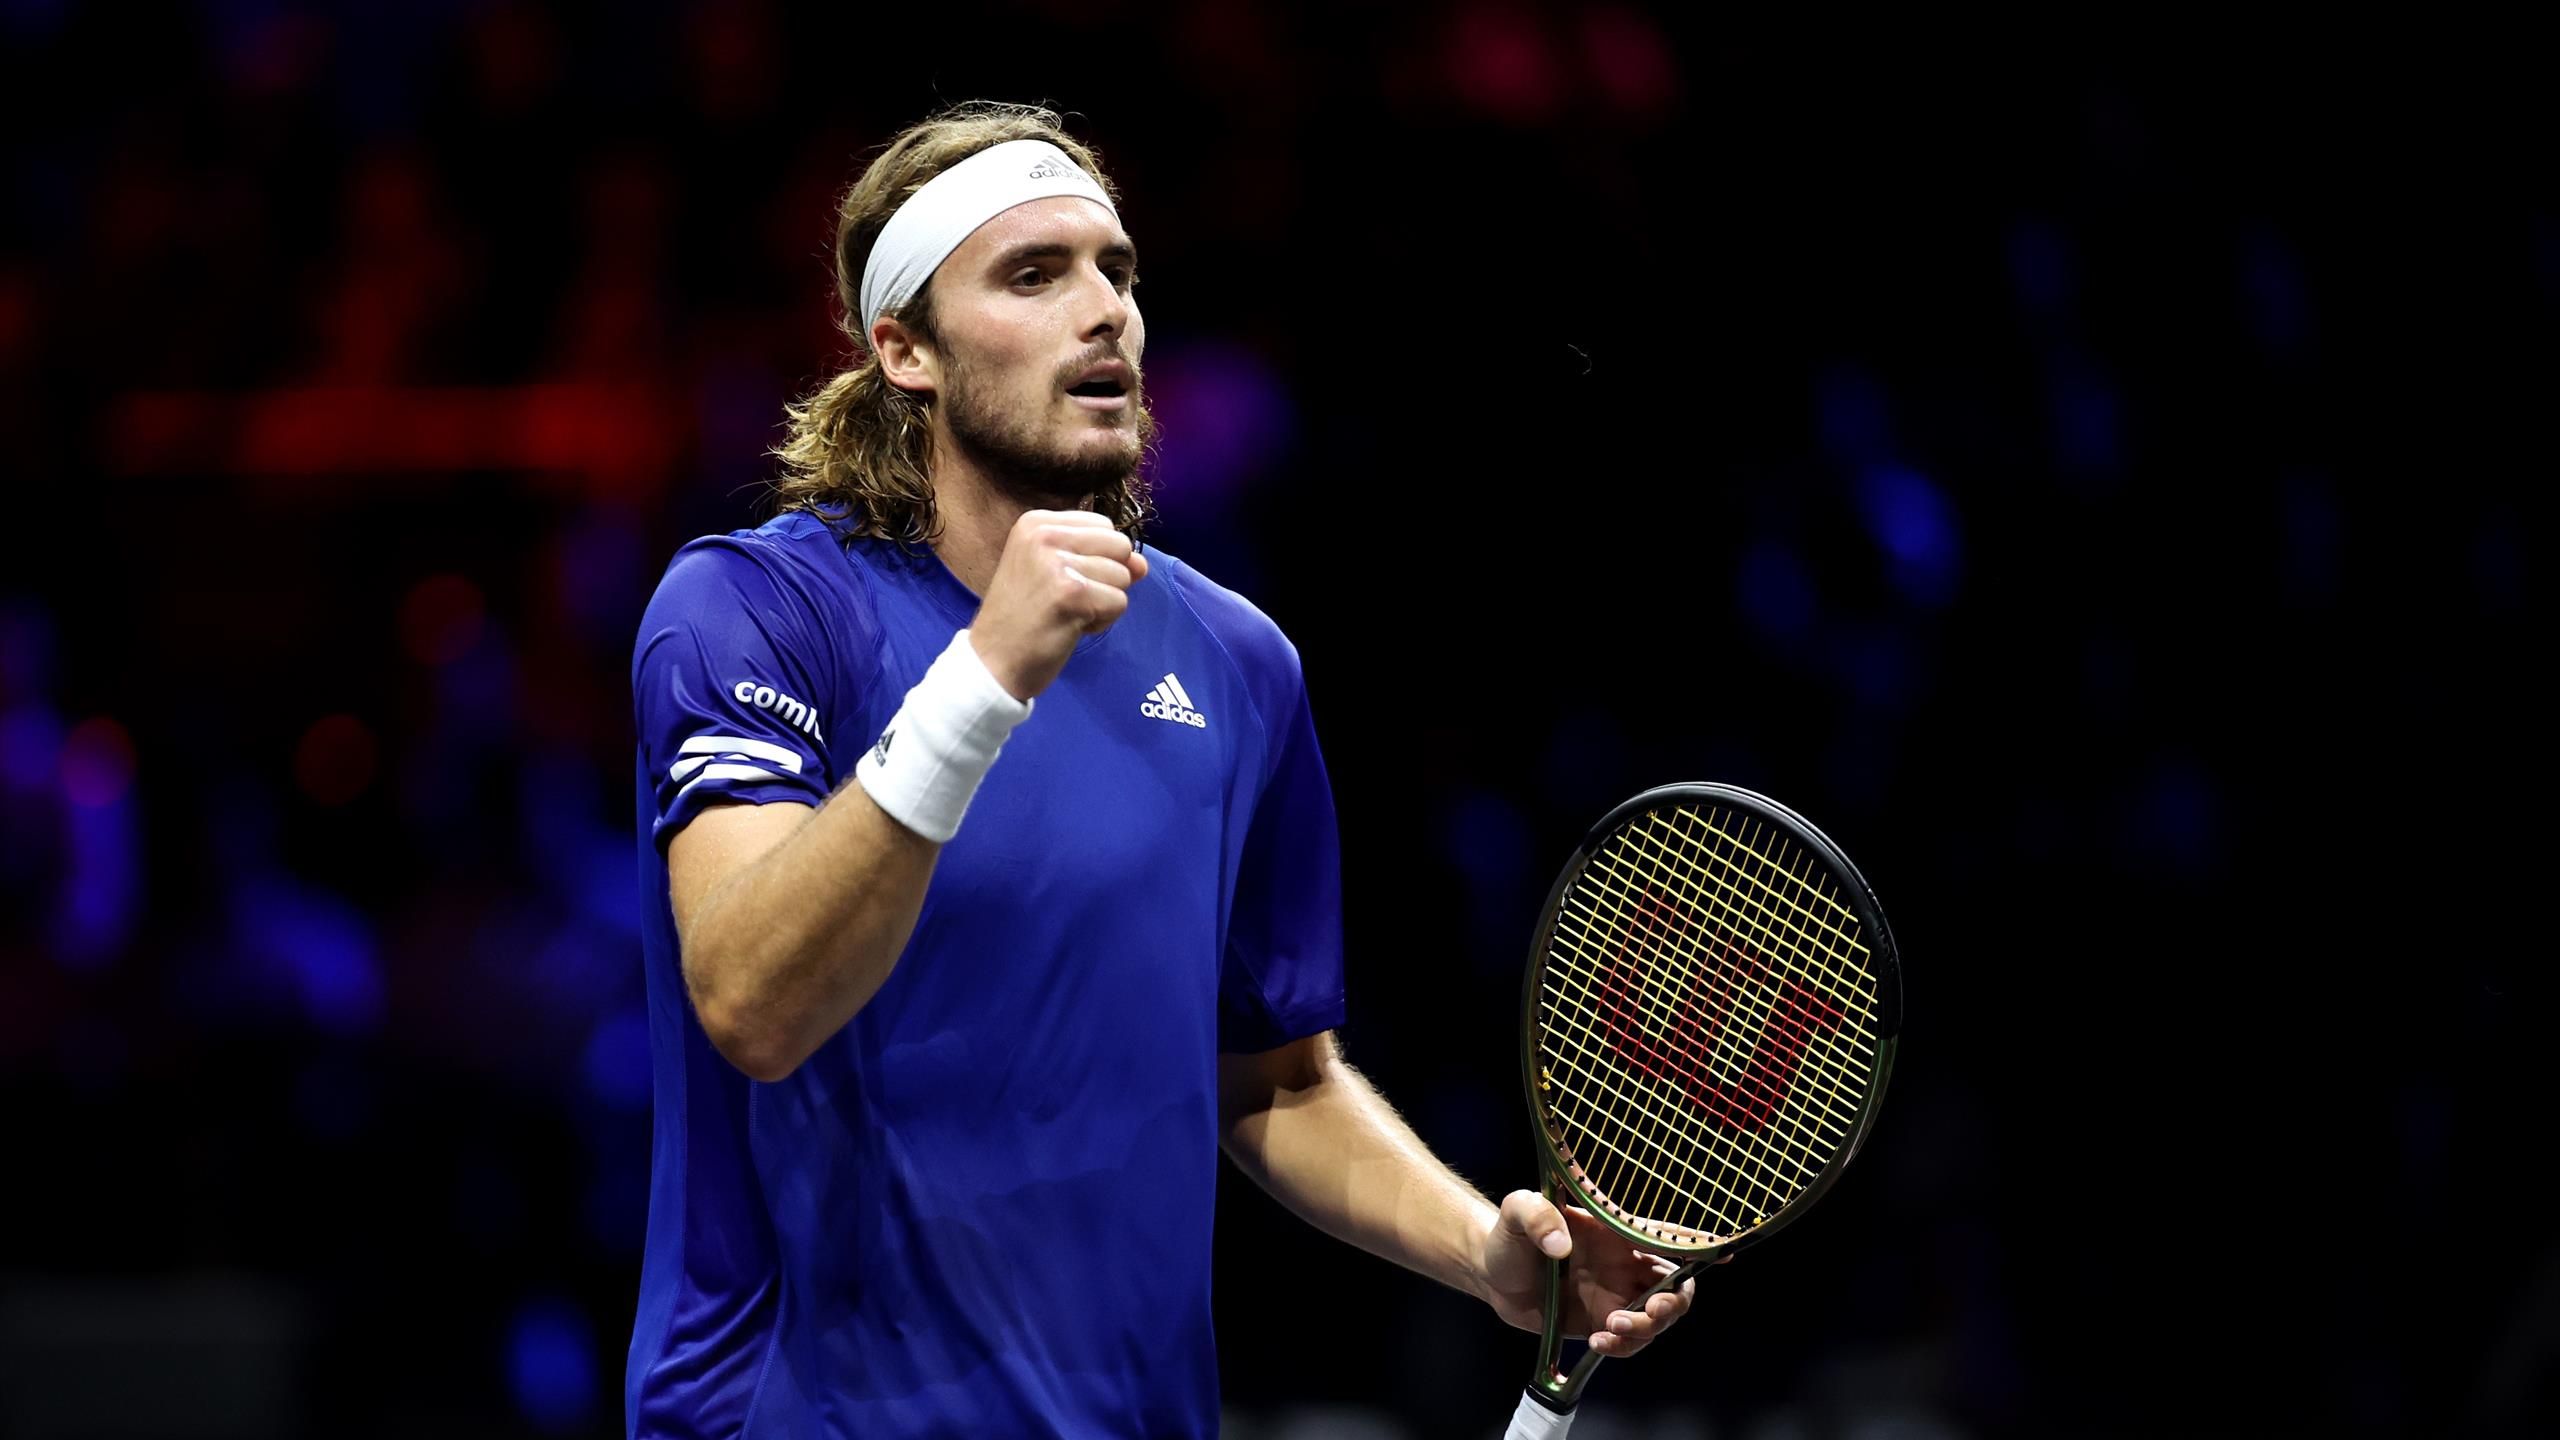 Laver Cup Stefanos Tsitsipas cruises past Diego Schwartzman to put Team Europe into a healthy lead